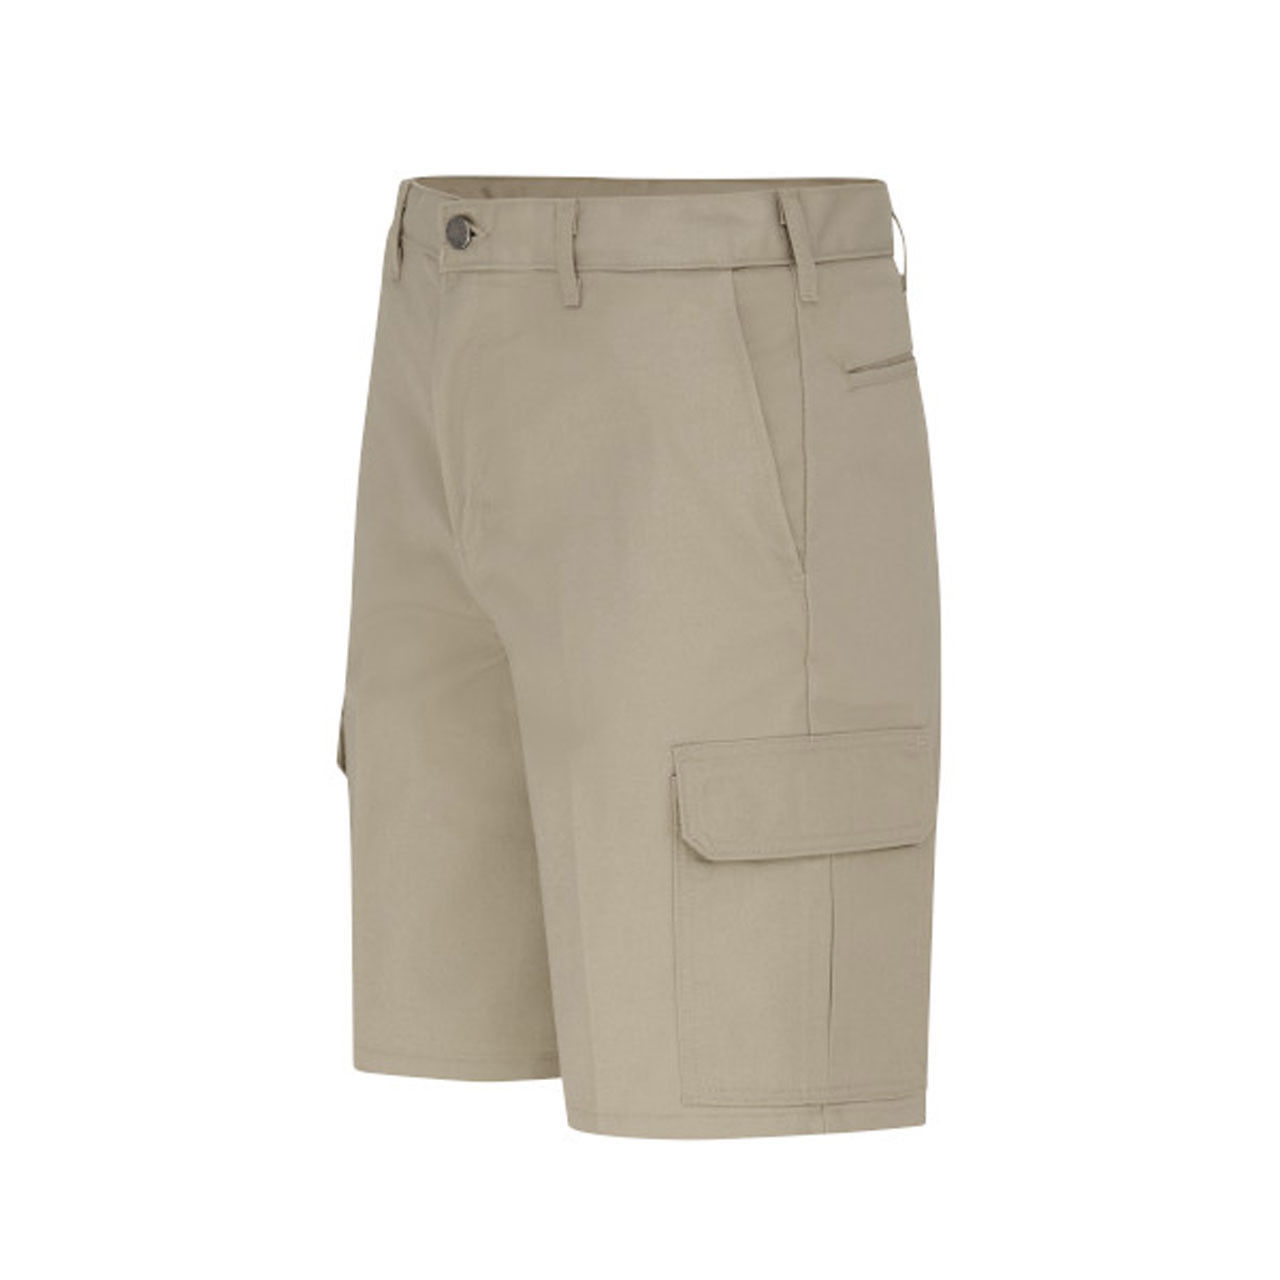 What type of finish do the Dickies Industrial Cargo Short - LR00, dickies cargo shorts, have?